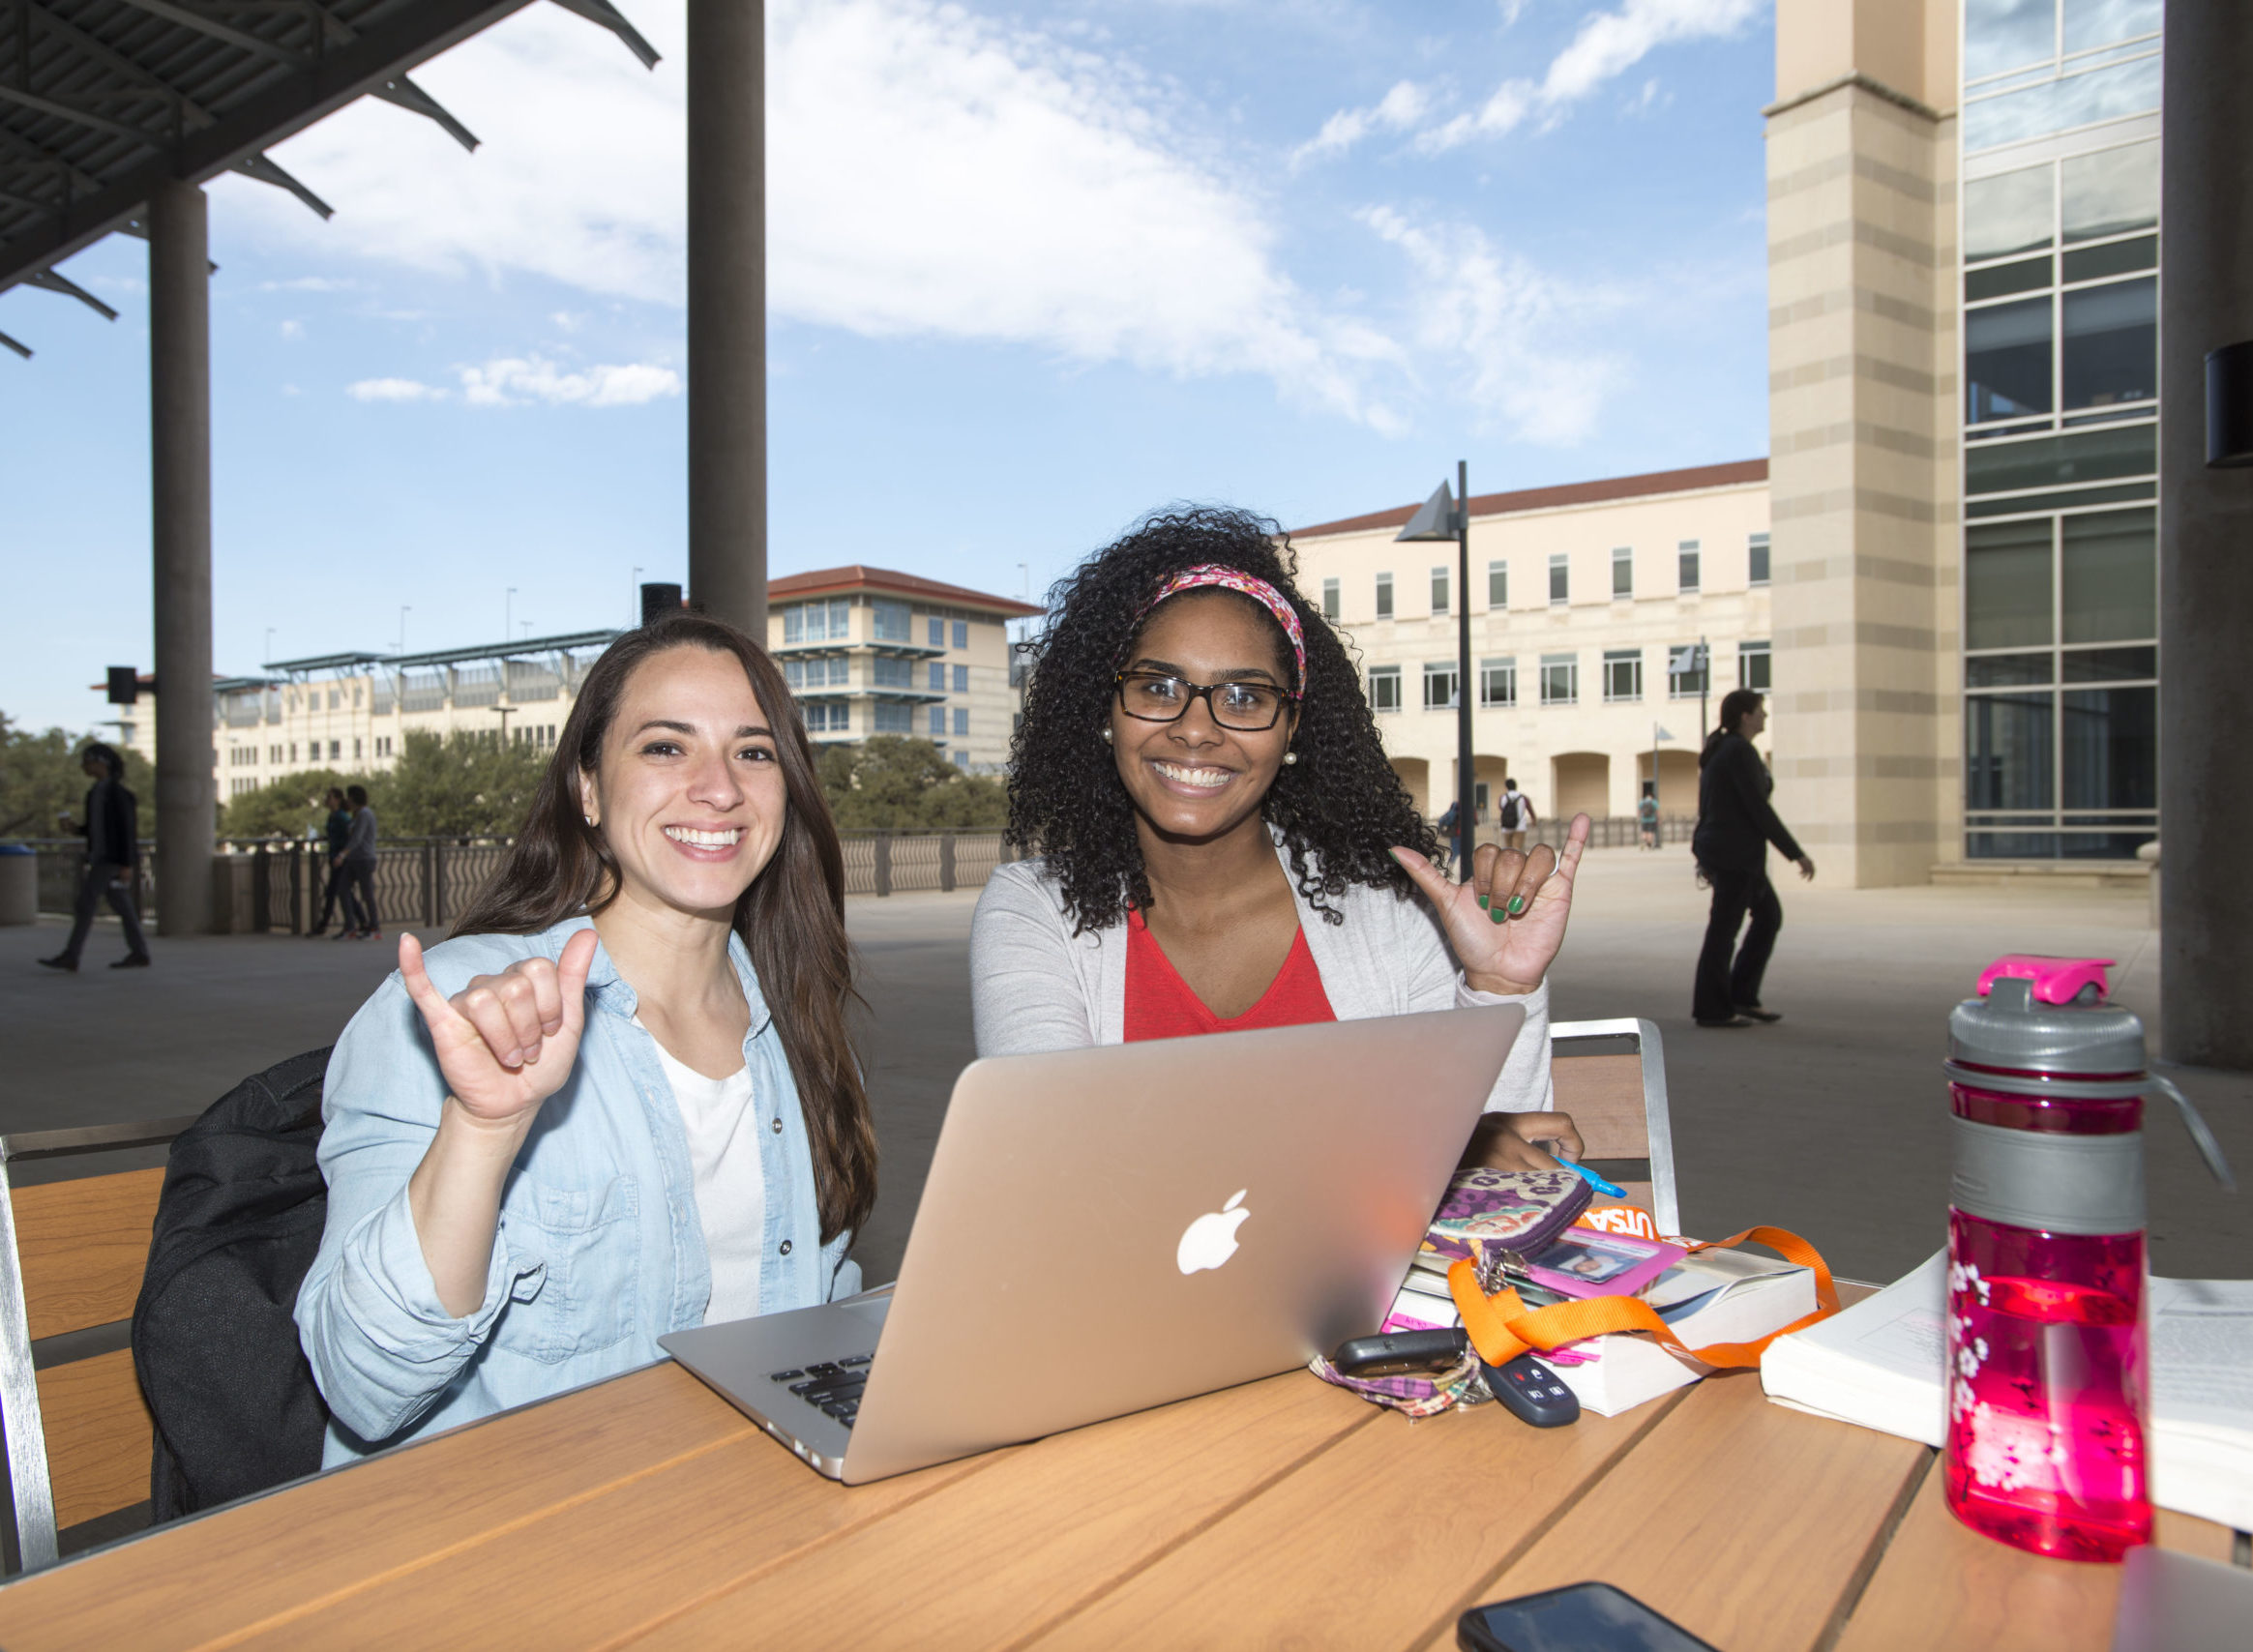 Two female UTSA students giving the birds up and smiling